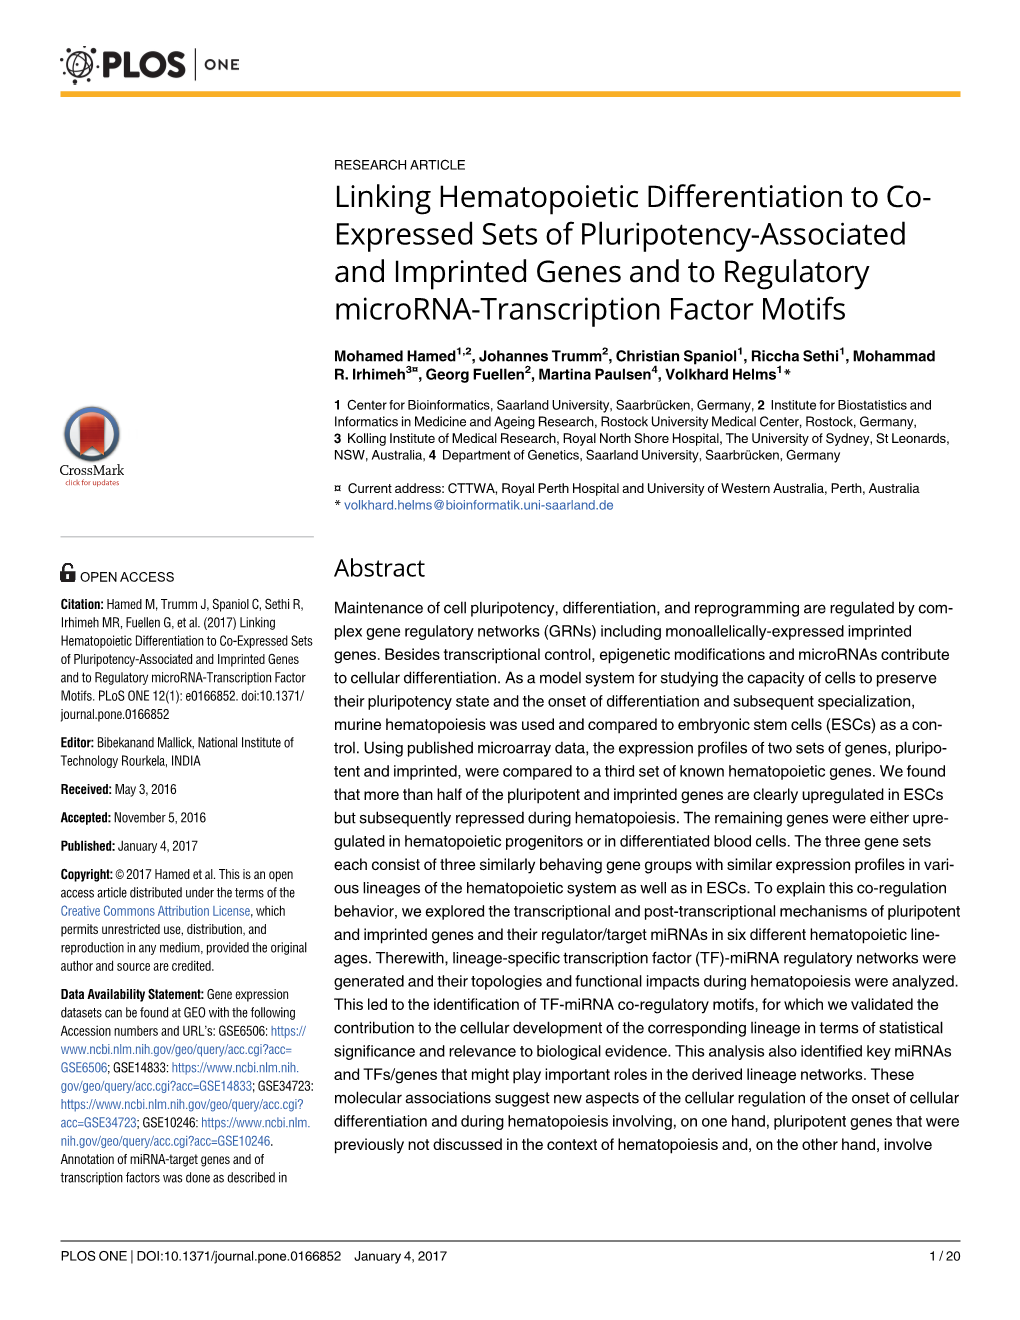 Linking Hematopoietic Differentiation to Co-Expressed Sets of Pluripotency-Associated and Imprinted Genes and to Regulatory Micr